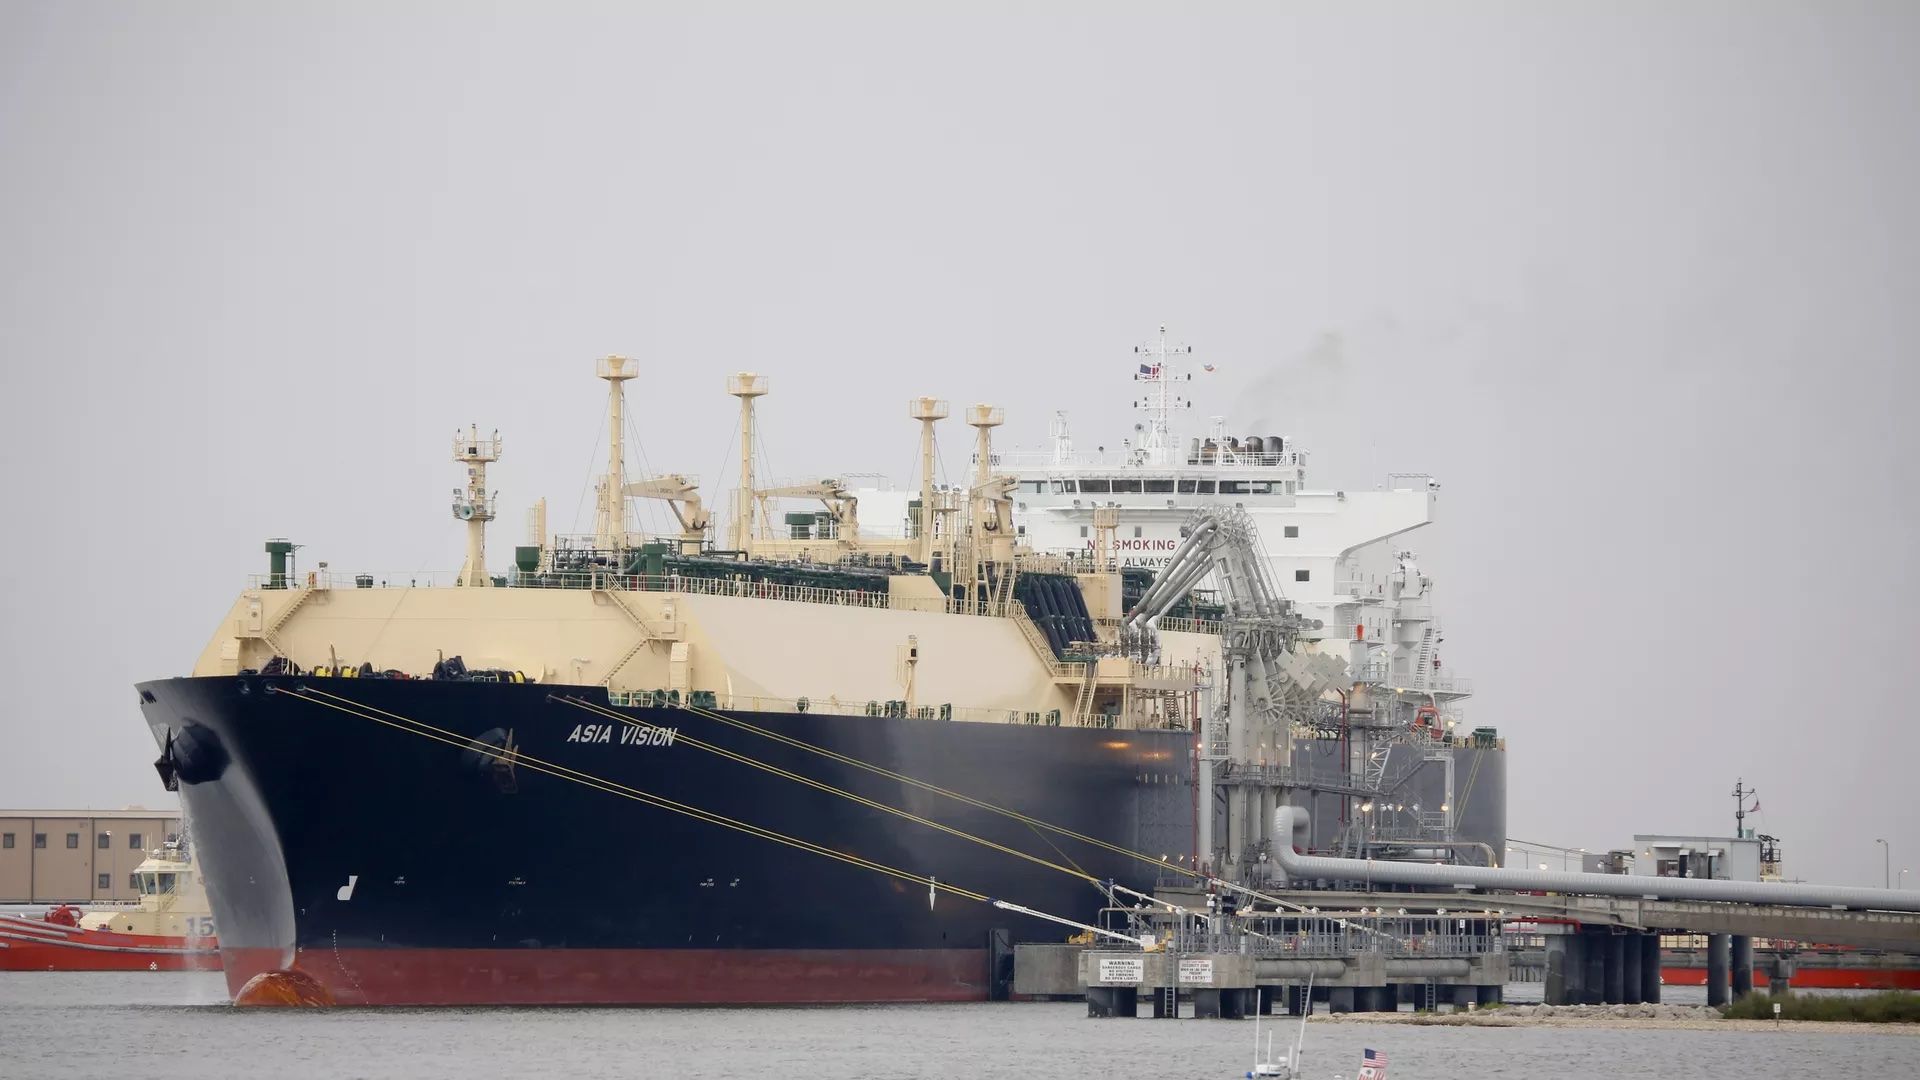 The Asia Vision LNG carrier ship docked at a terminal in Sabine Pass, Texas